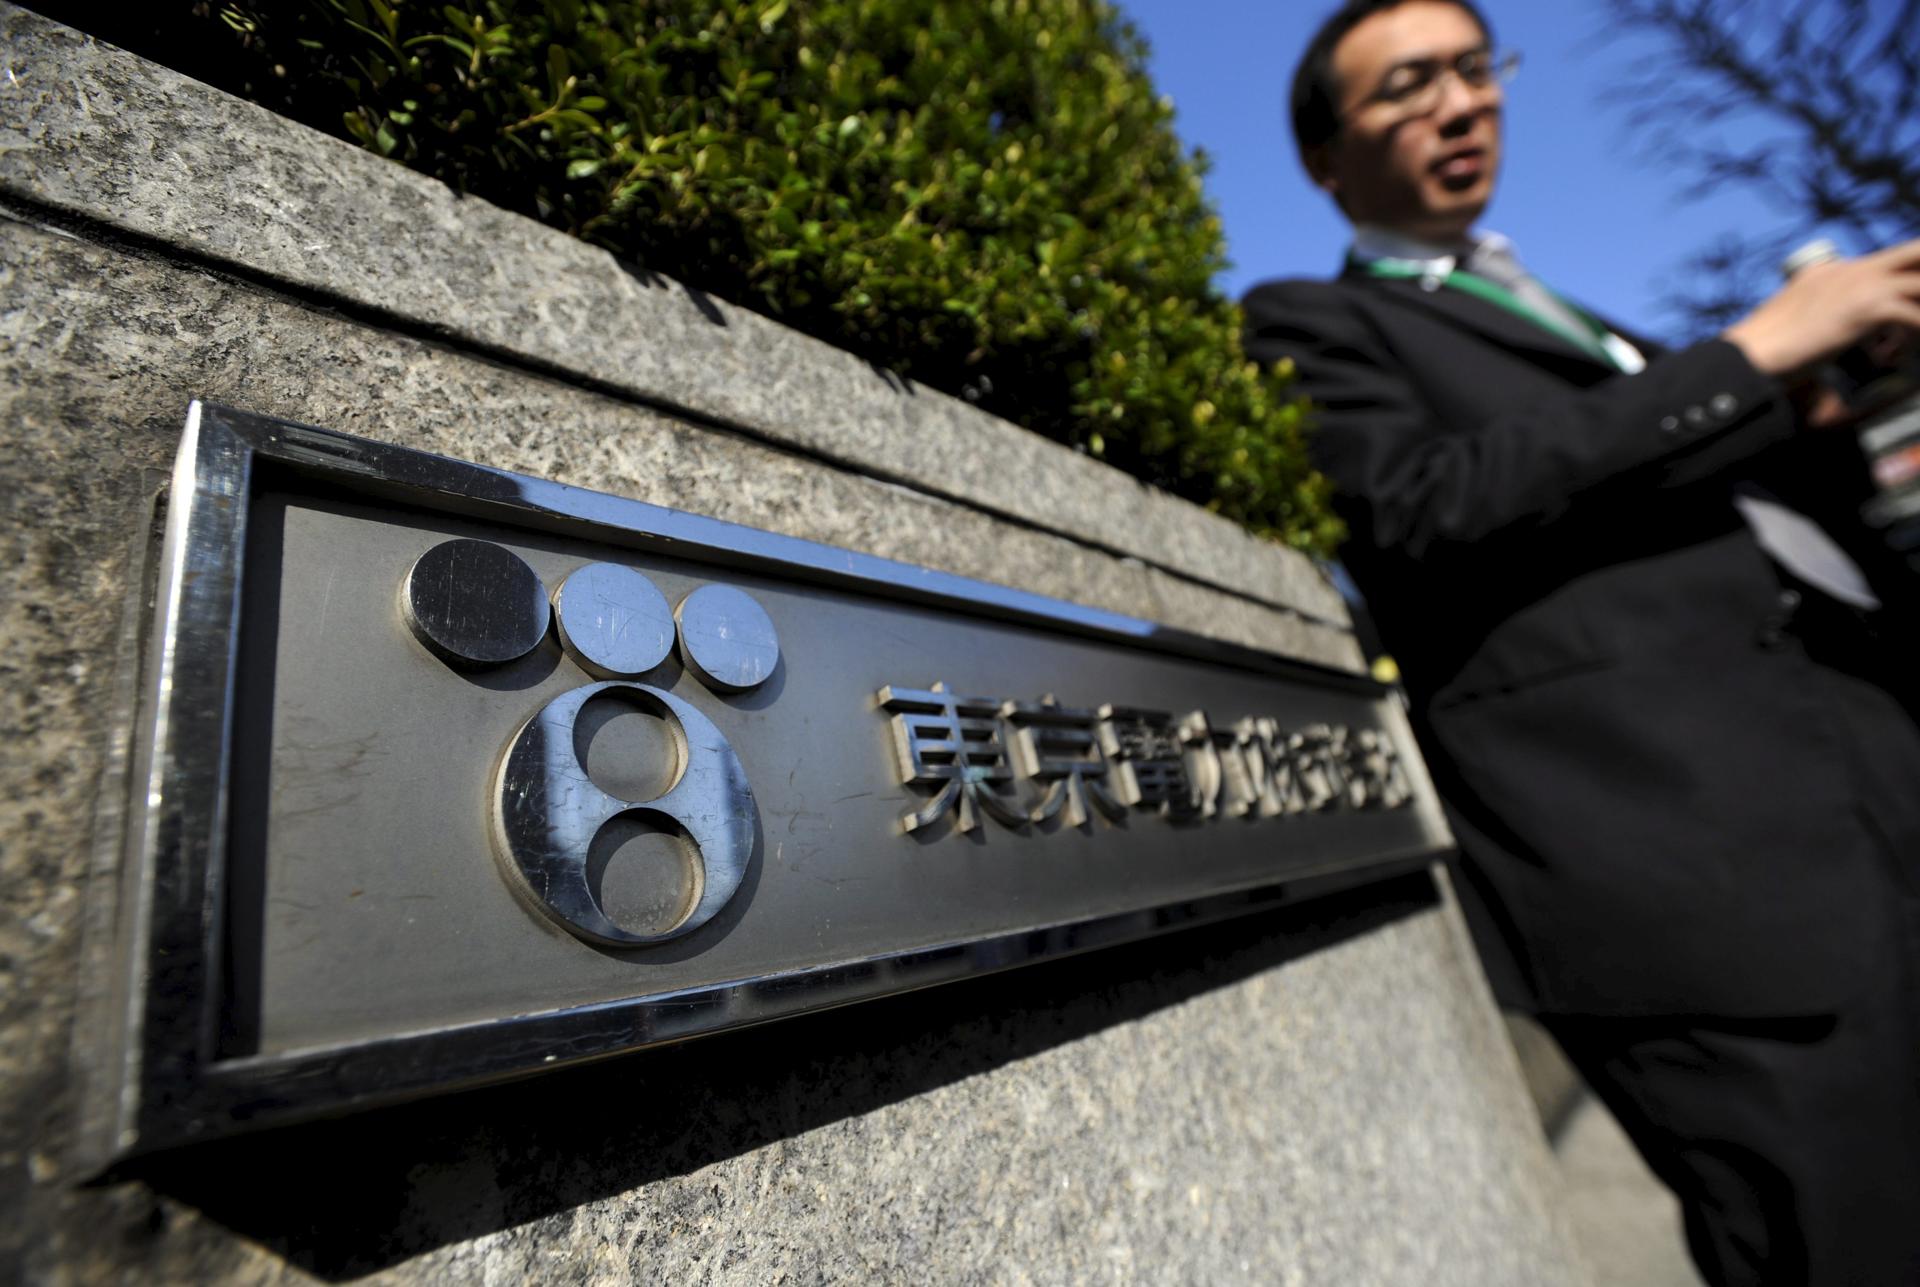 A man walks out of the Tokyo Electric Power Co (TEPCO) headquarters gate in Tokyo, Japan, 06 April 2011. EFE-EPA FILE/FRANCK ROBICHON